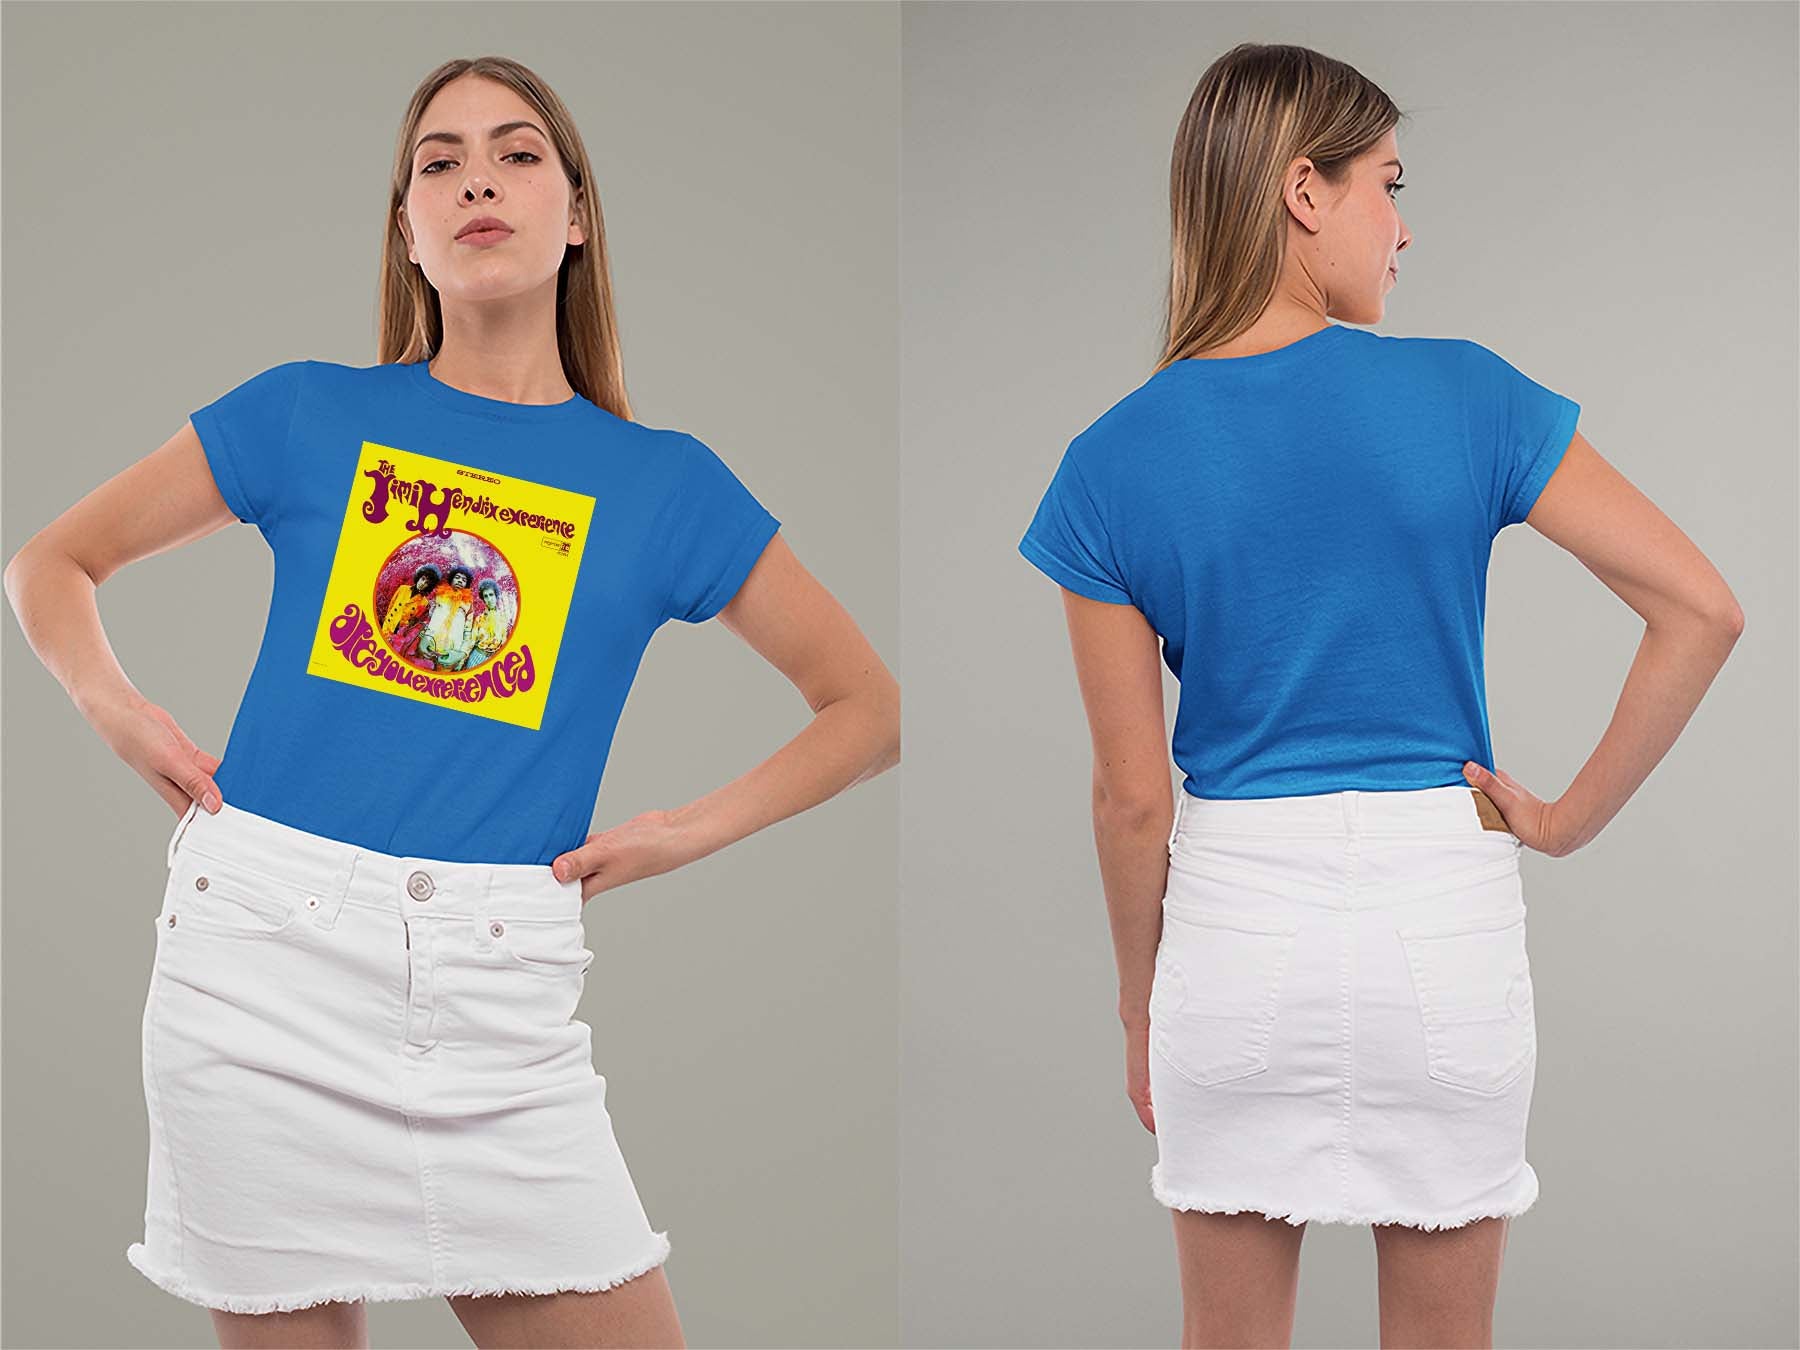 Are You Experienced Ladies Crew (Round) Neck Shirt Small Royal